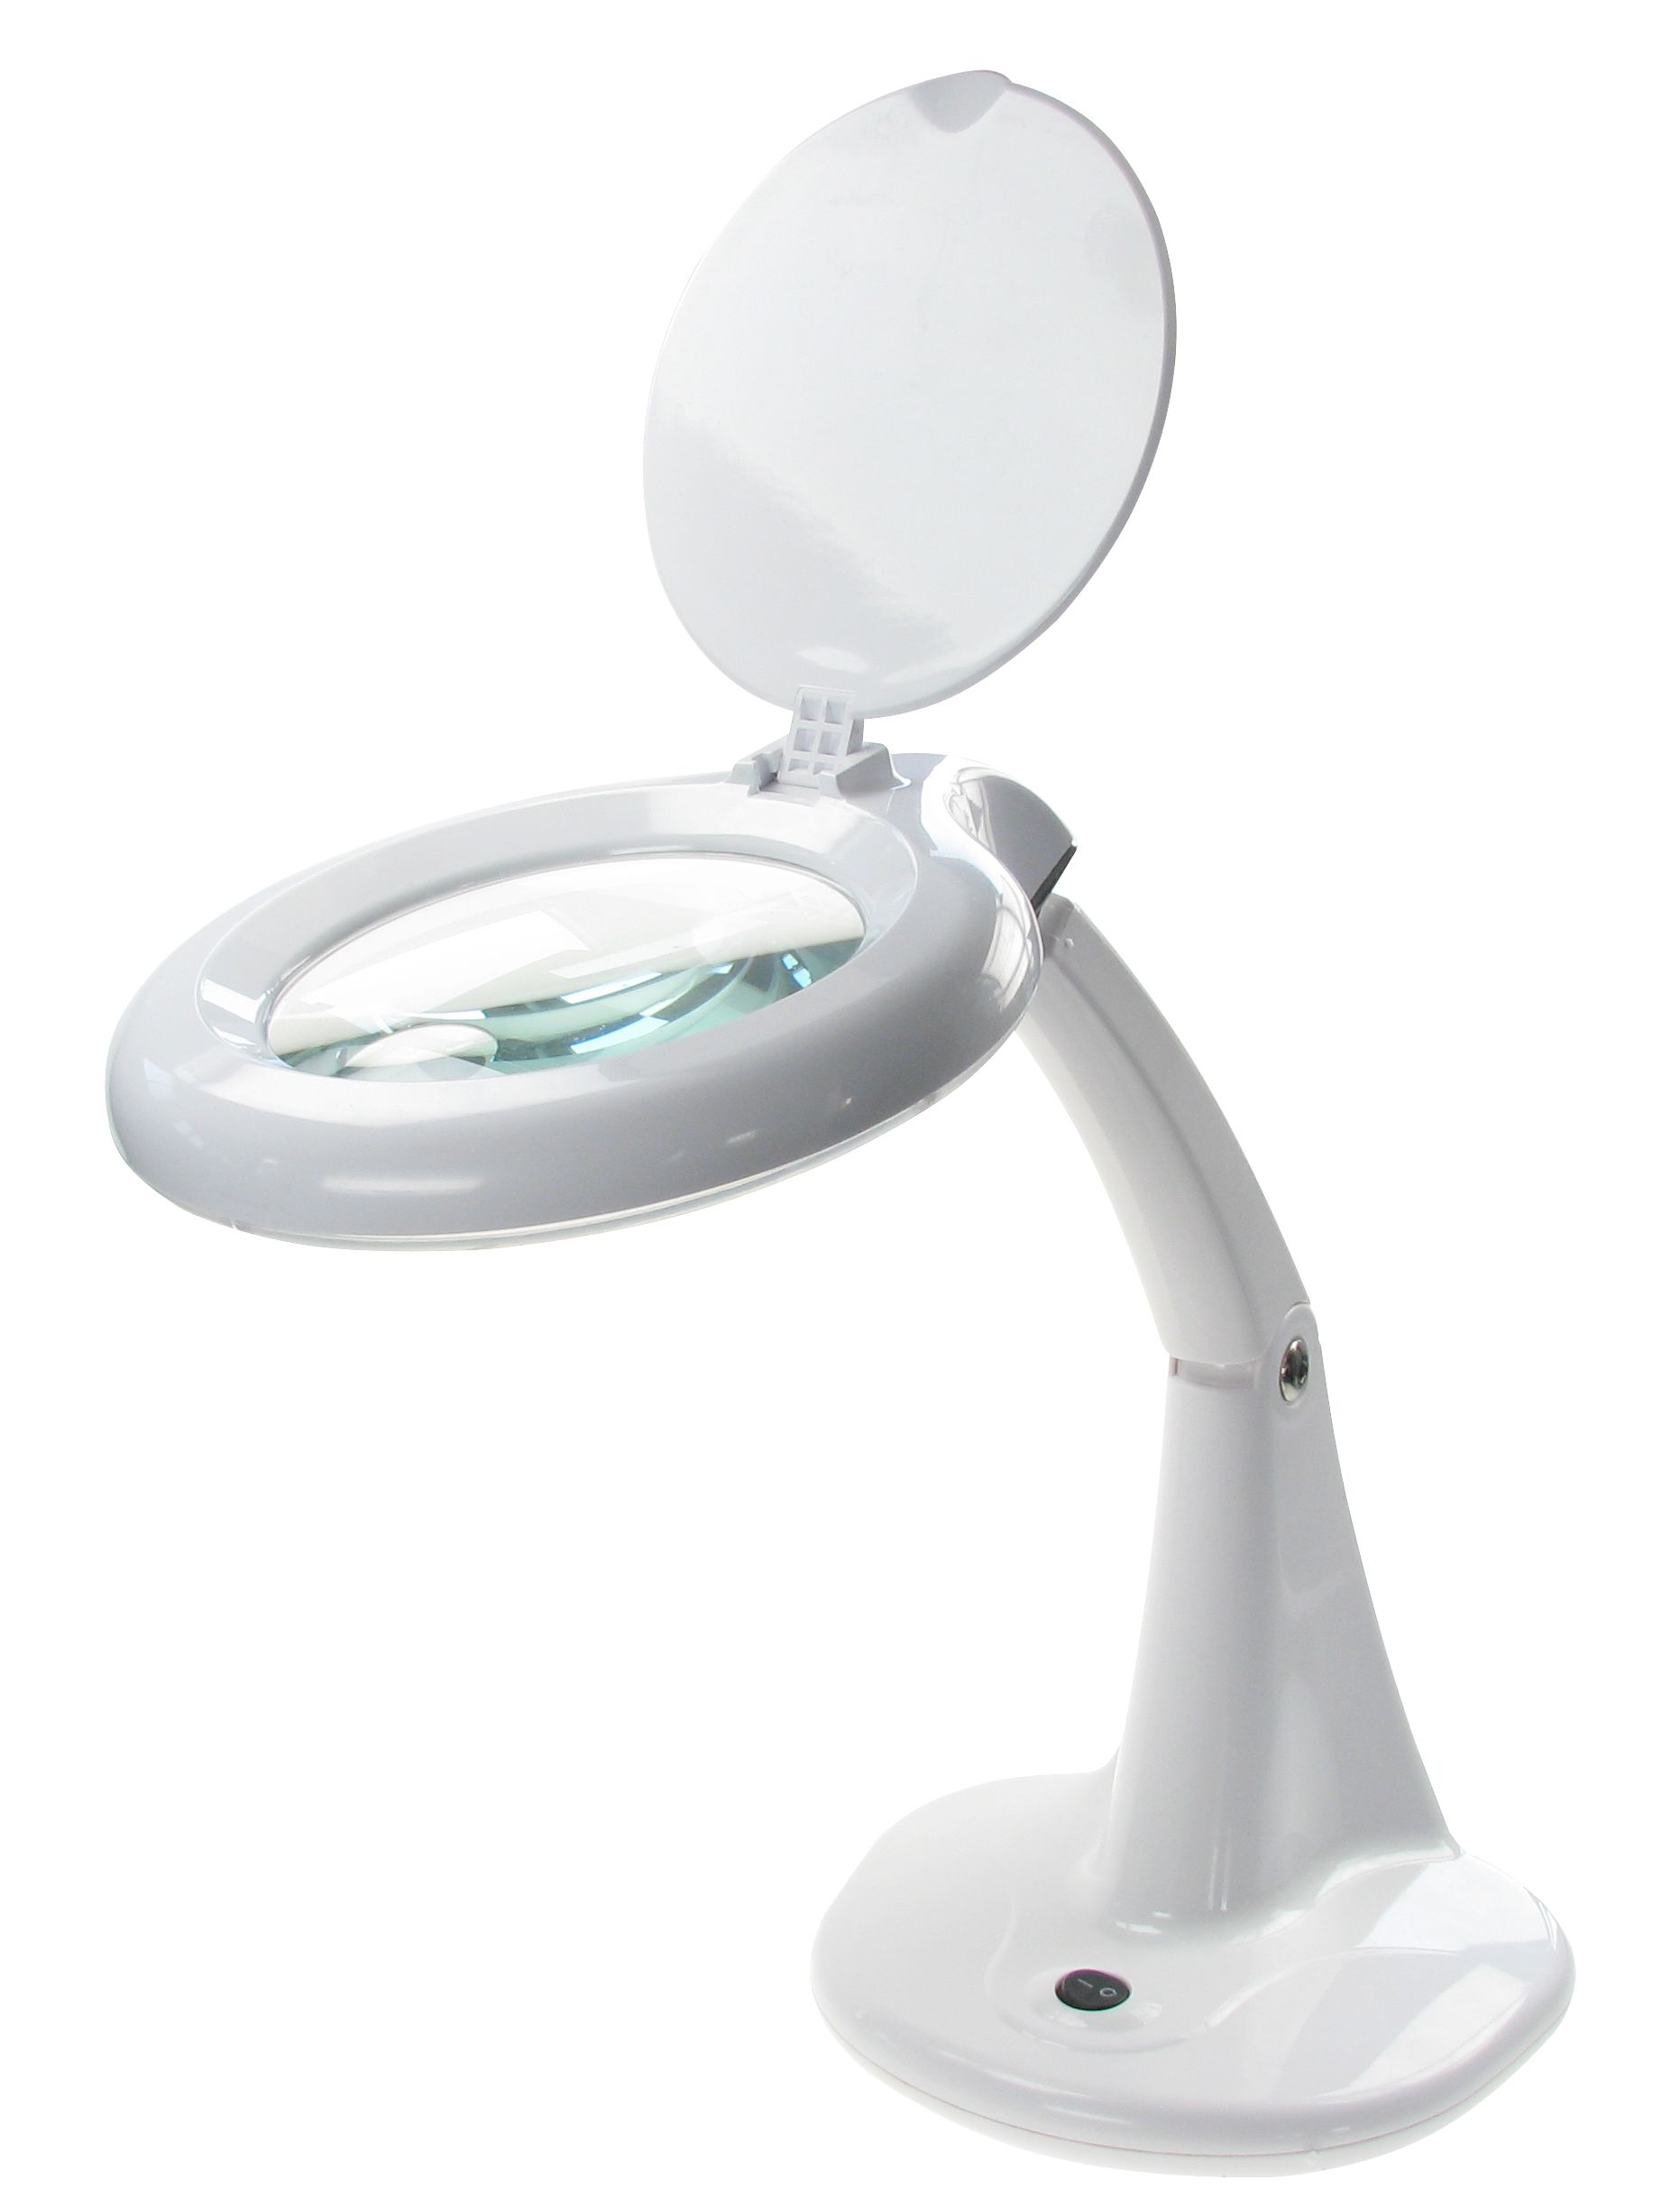 Table magnifier with light